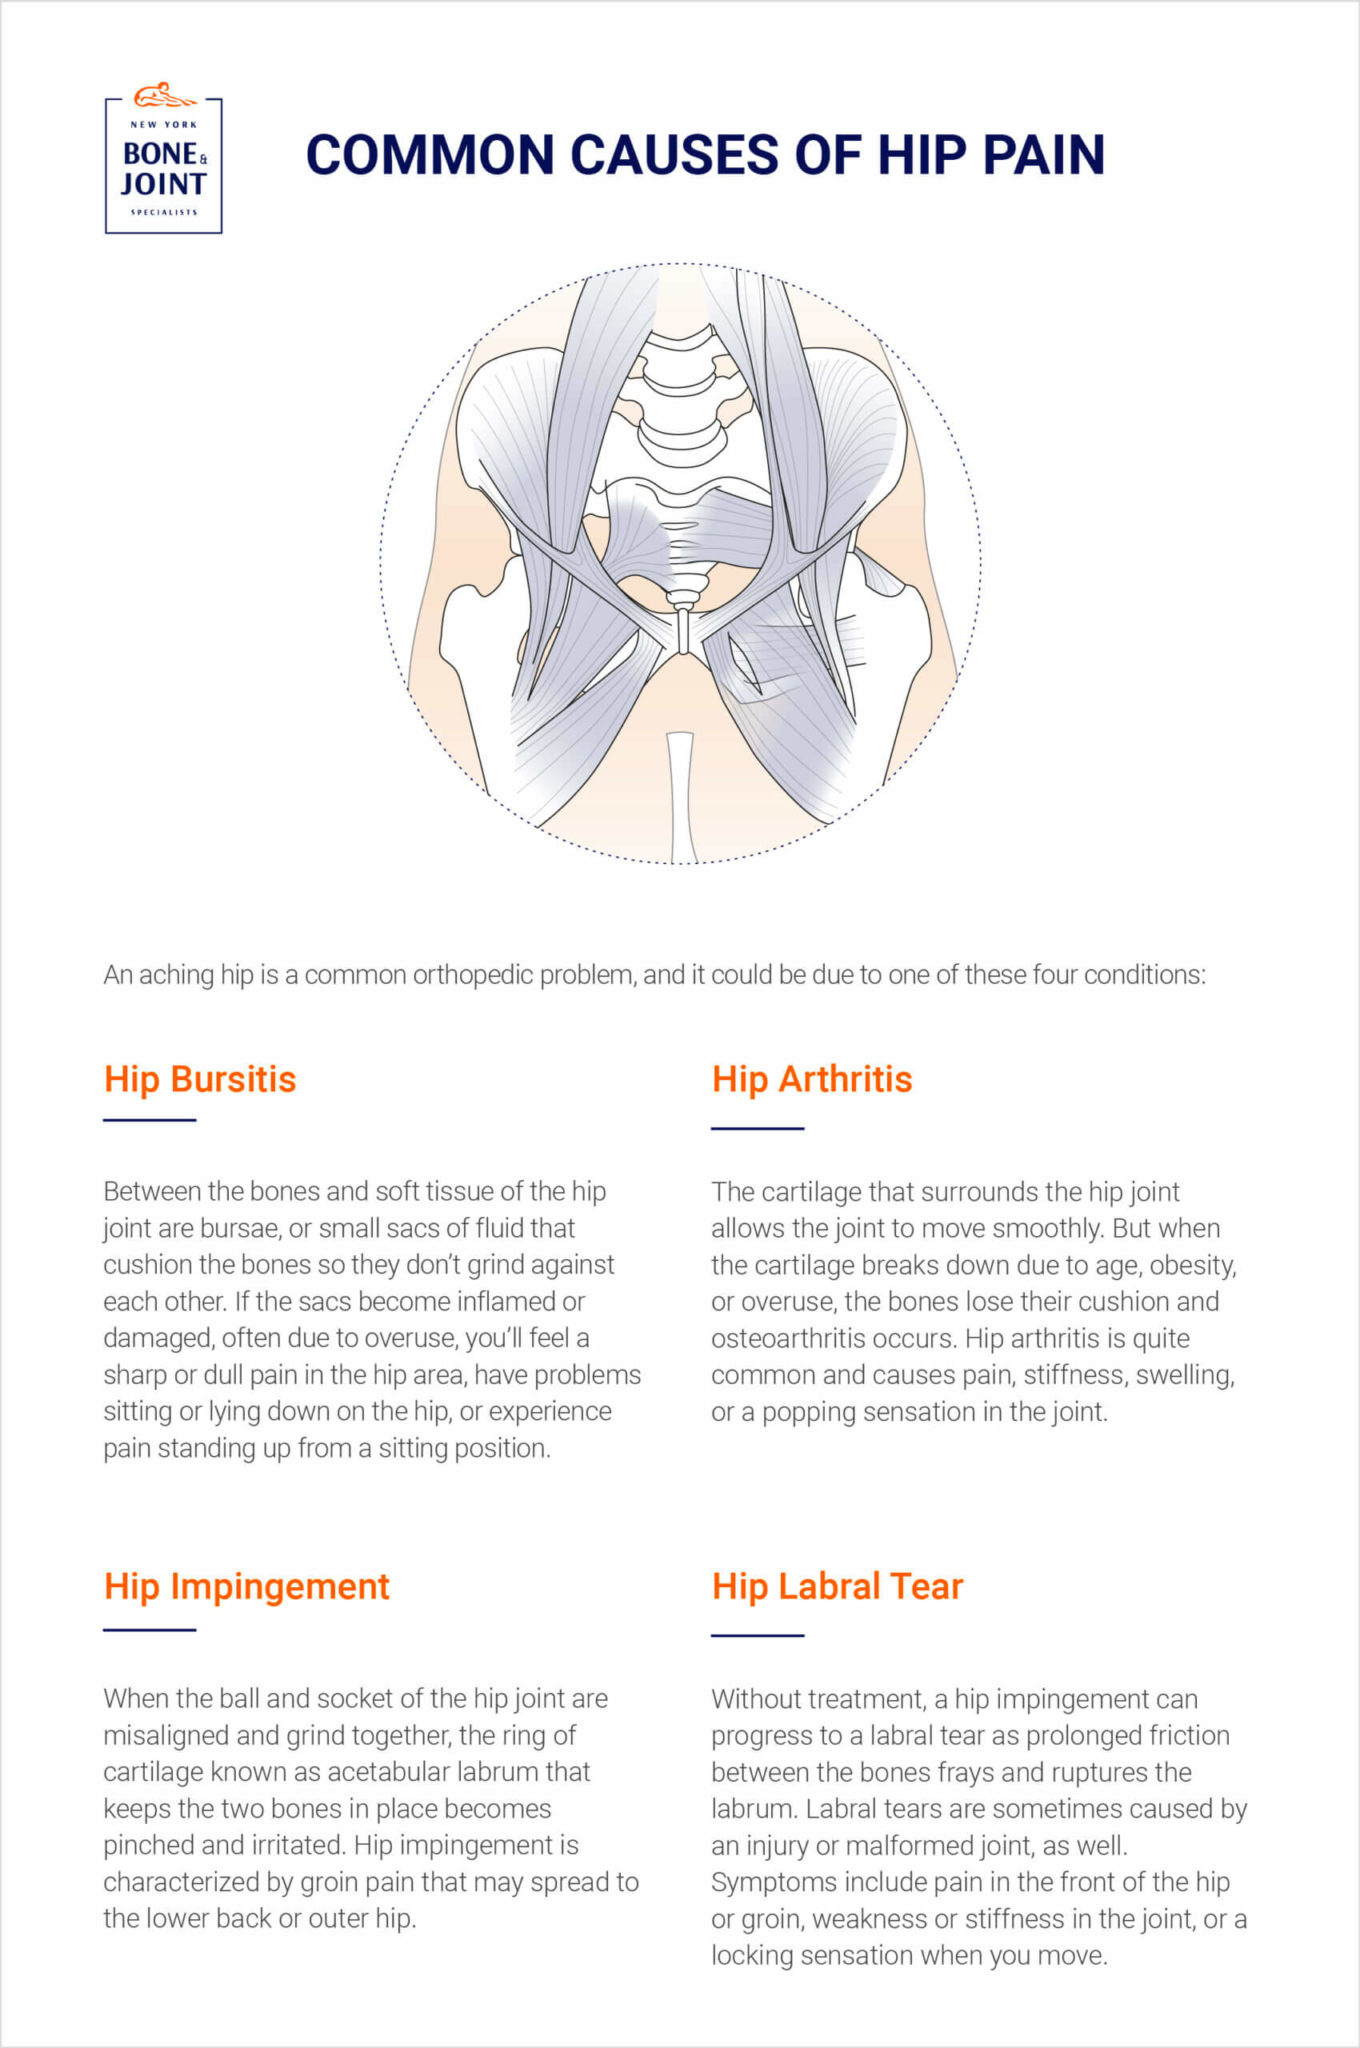 What organs can cause right hip pain?